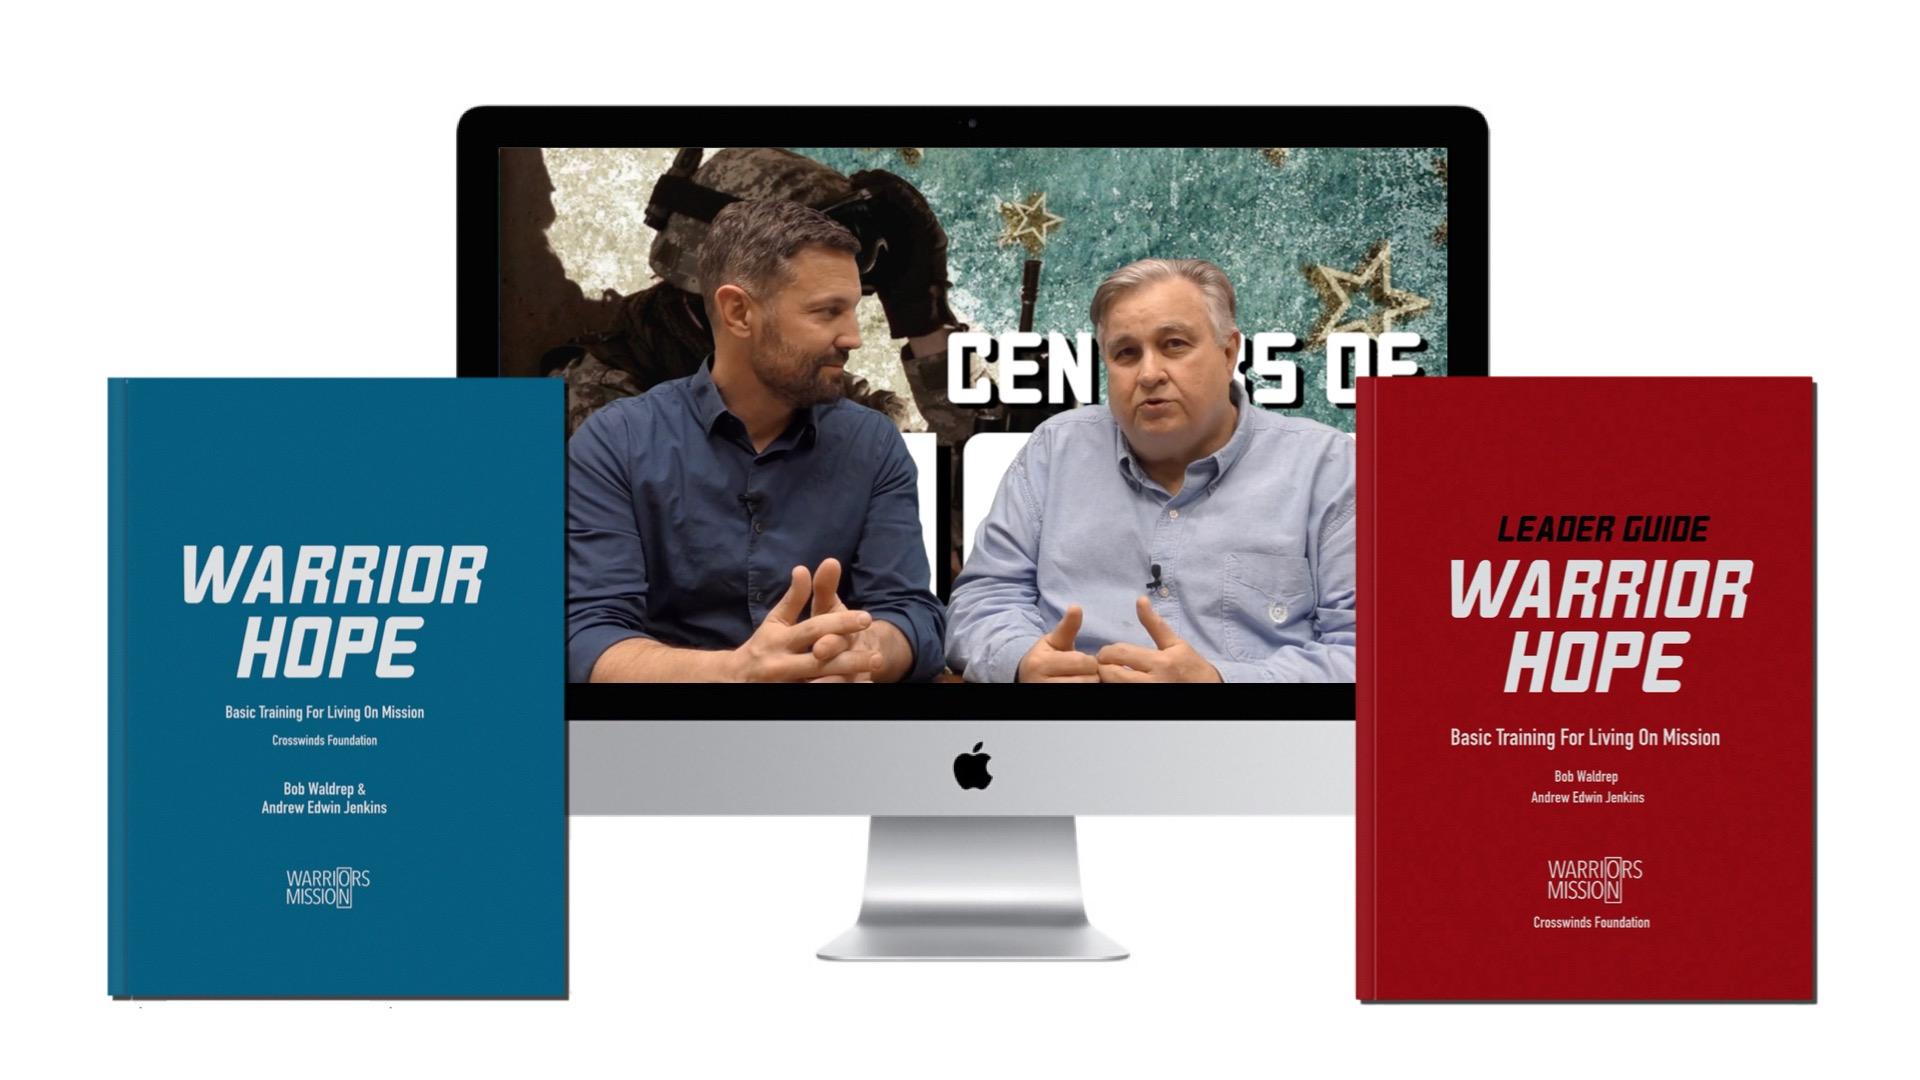 Centers of Hope Leadership Videos and PowerPoints - Regularly Discounted at $149.99 (Retail $199.99)